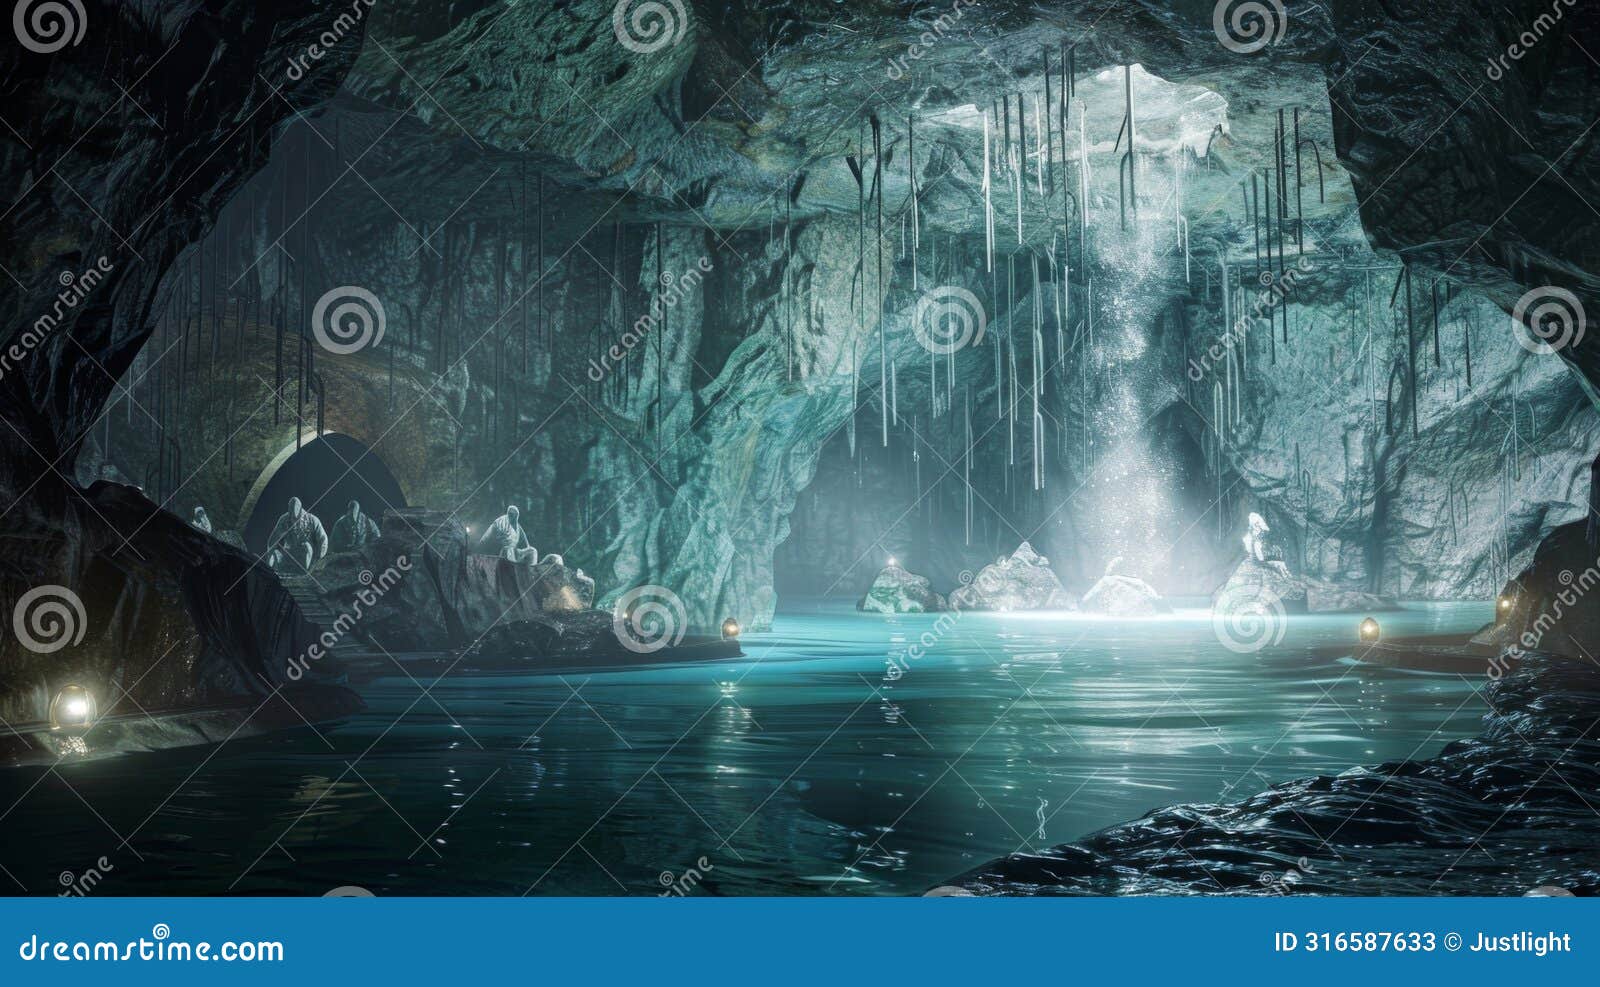 deep within a hidden cave a group of elven waterwielders meditate channeling their combined energy to create a